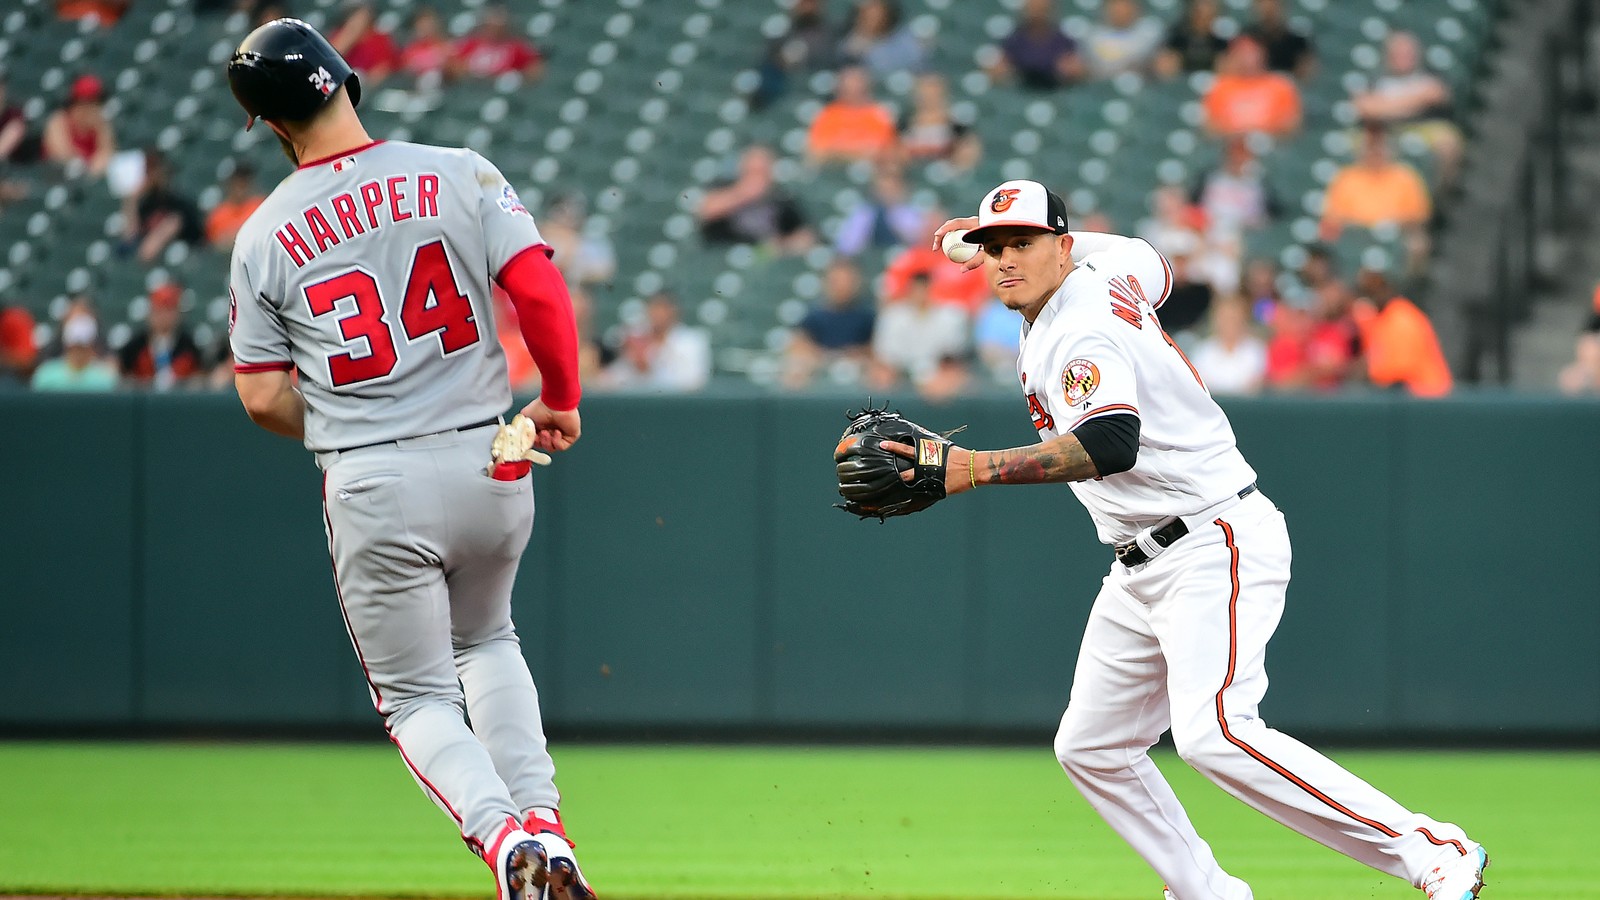 Bryce Harper or Manny Machado: Whose Contract Is Better? - The Atlantic